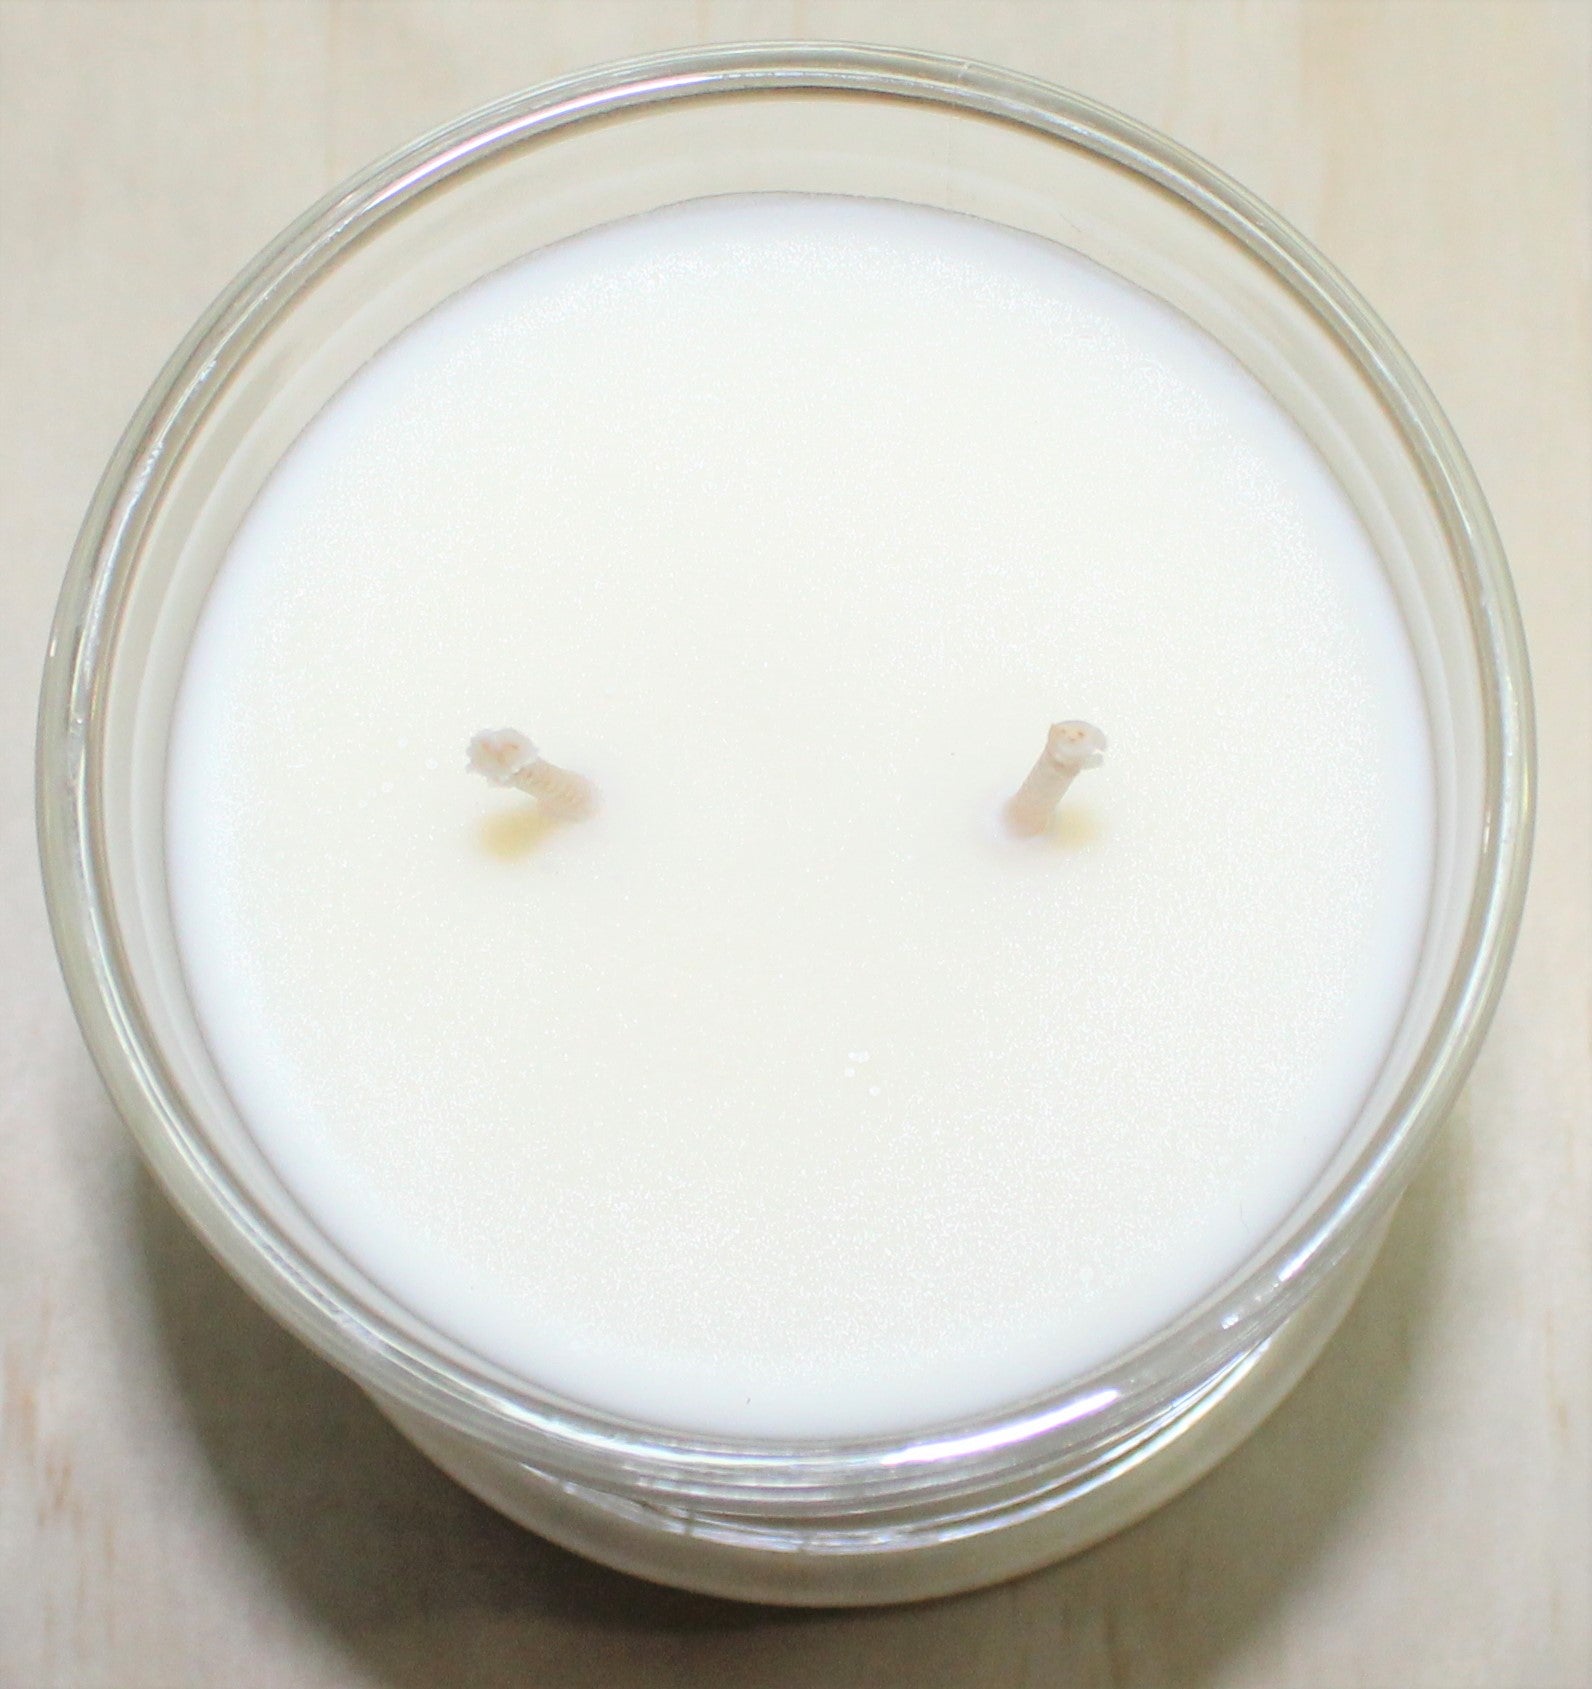 Vanilla Cove Soy Candle 50 hour Sea Salt and Caramel Fragrance in clear glass jar image shows 2 wicks